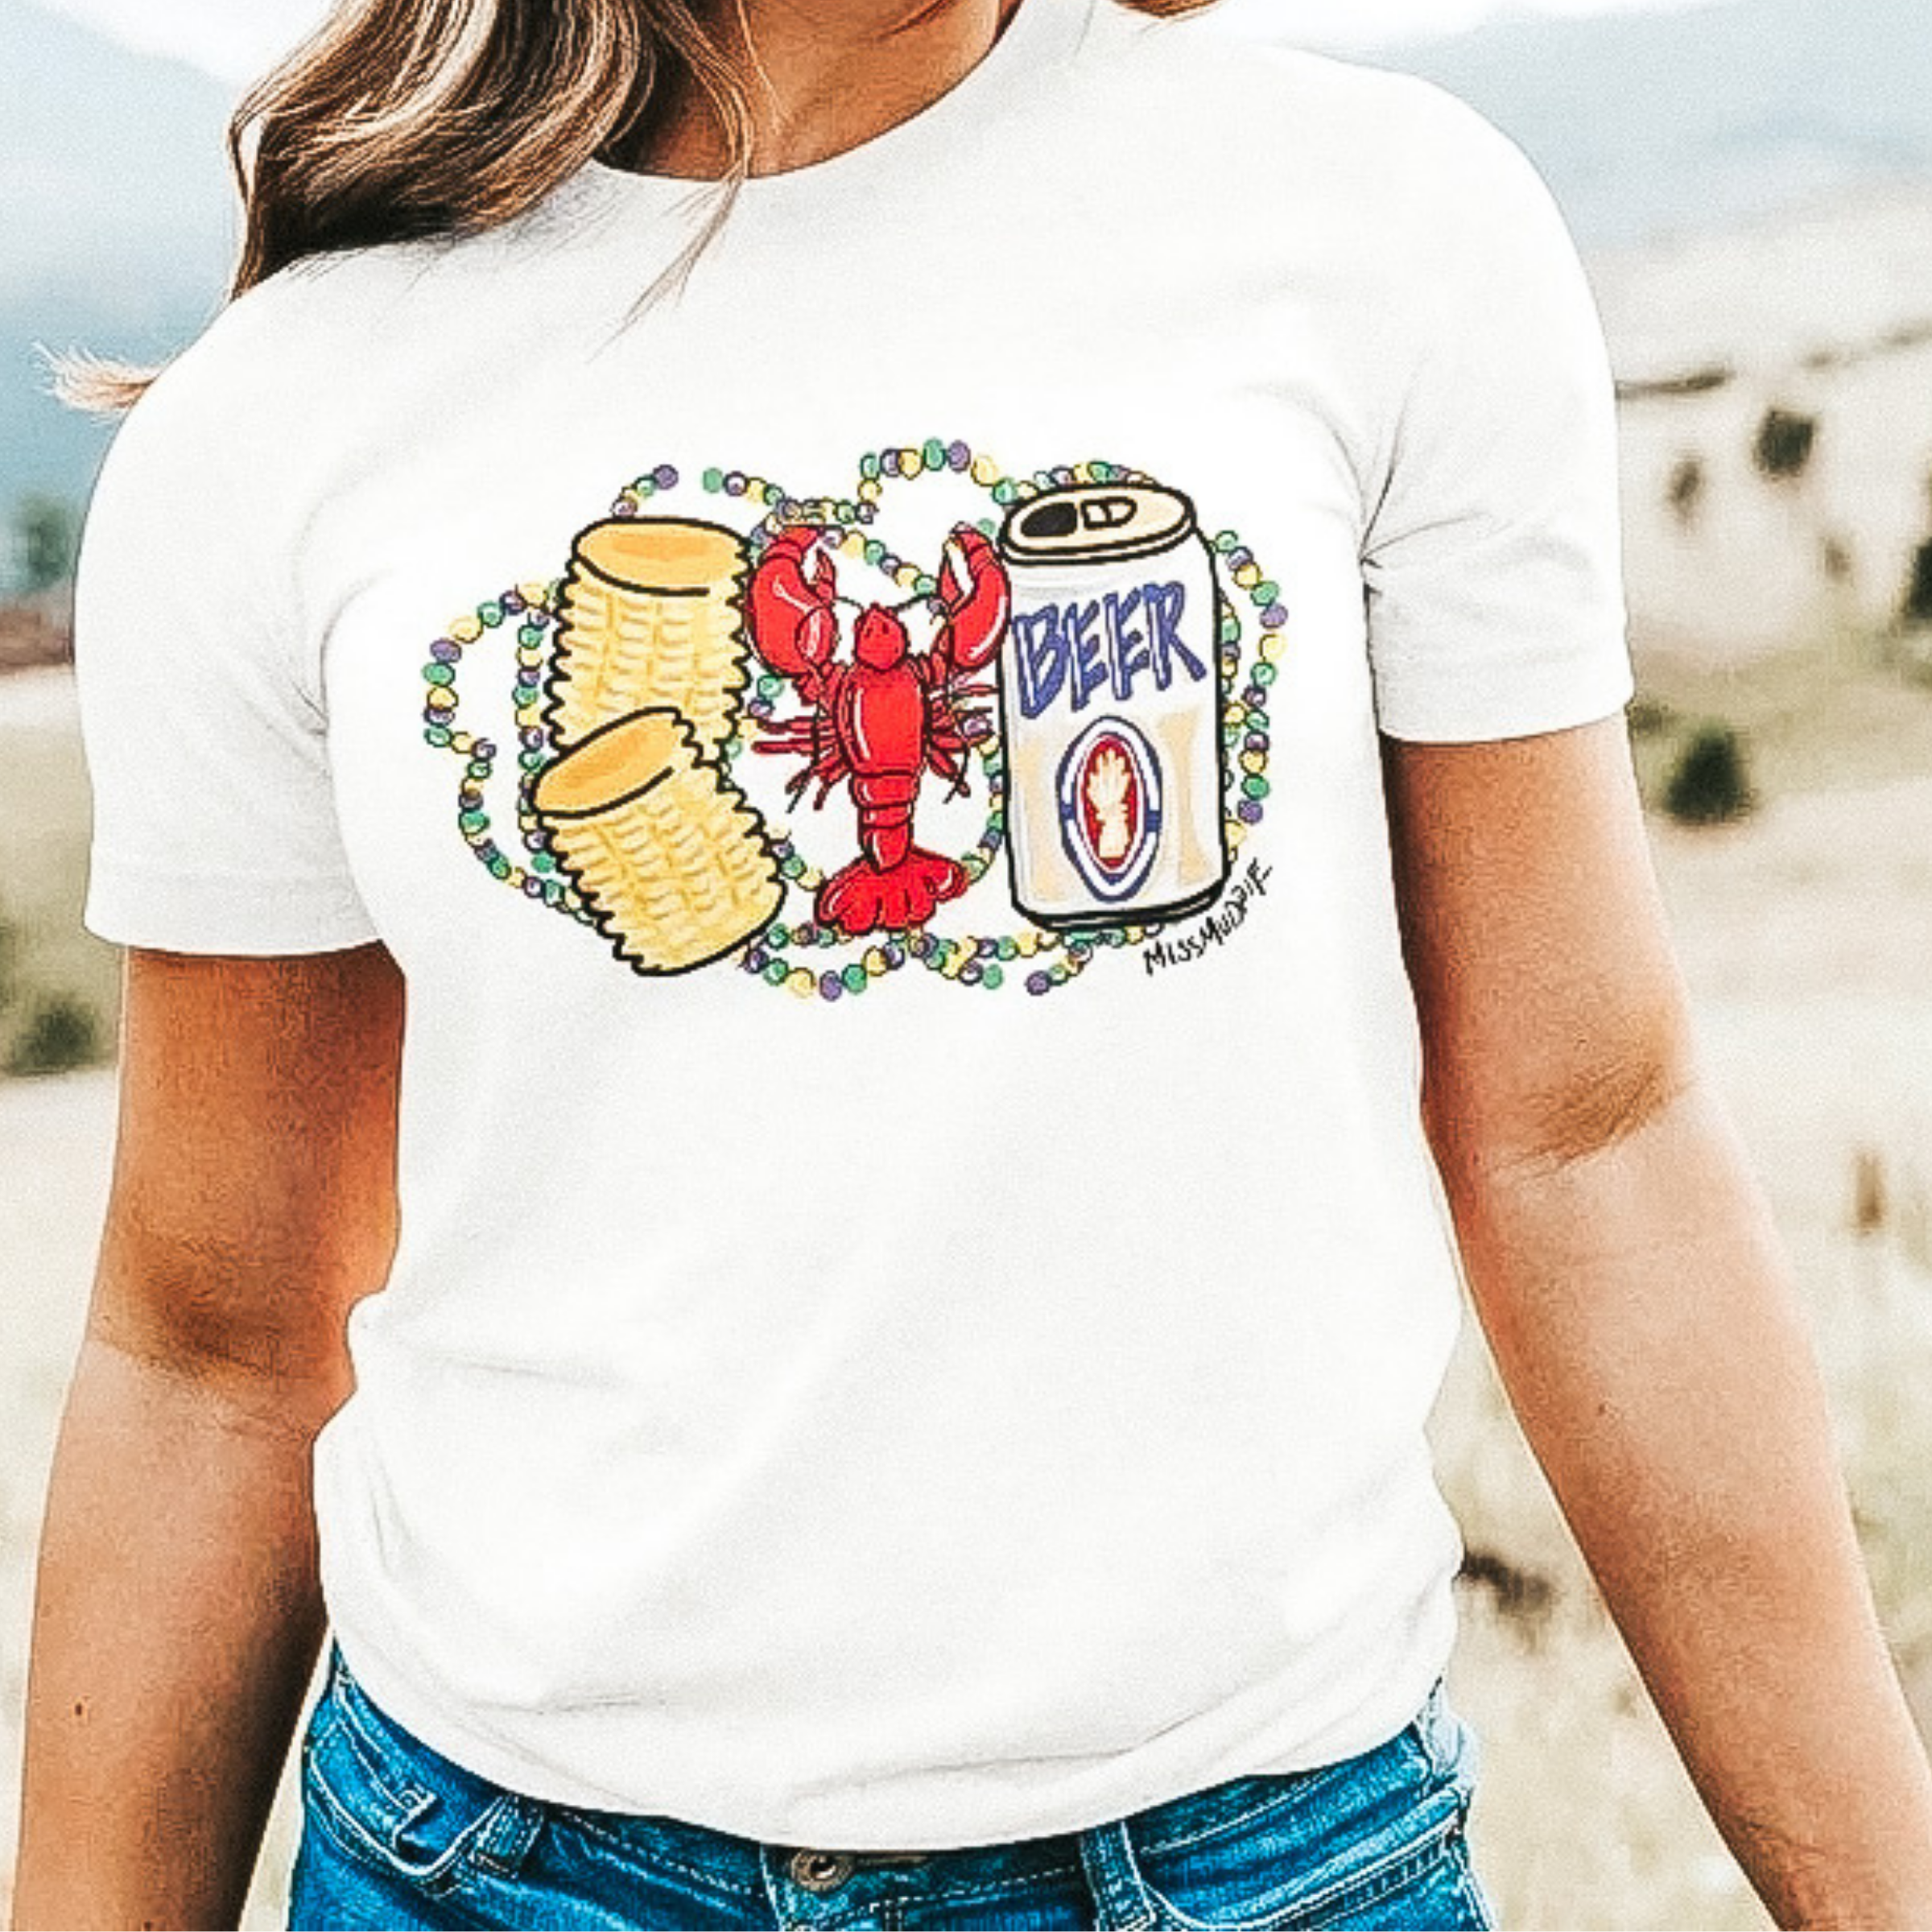 A cream colored crew neck tee shirt. The tee shirt has a graphic of corn, a crawfish, and a beer can. The graphic has mardi gras beads around it.